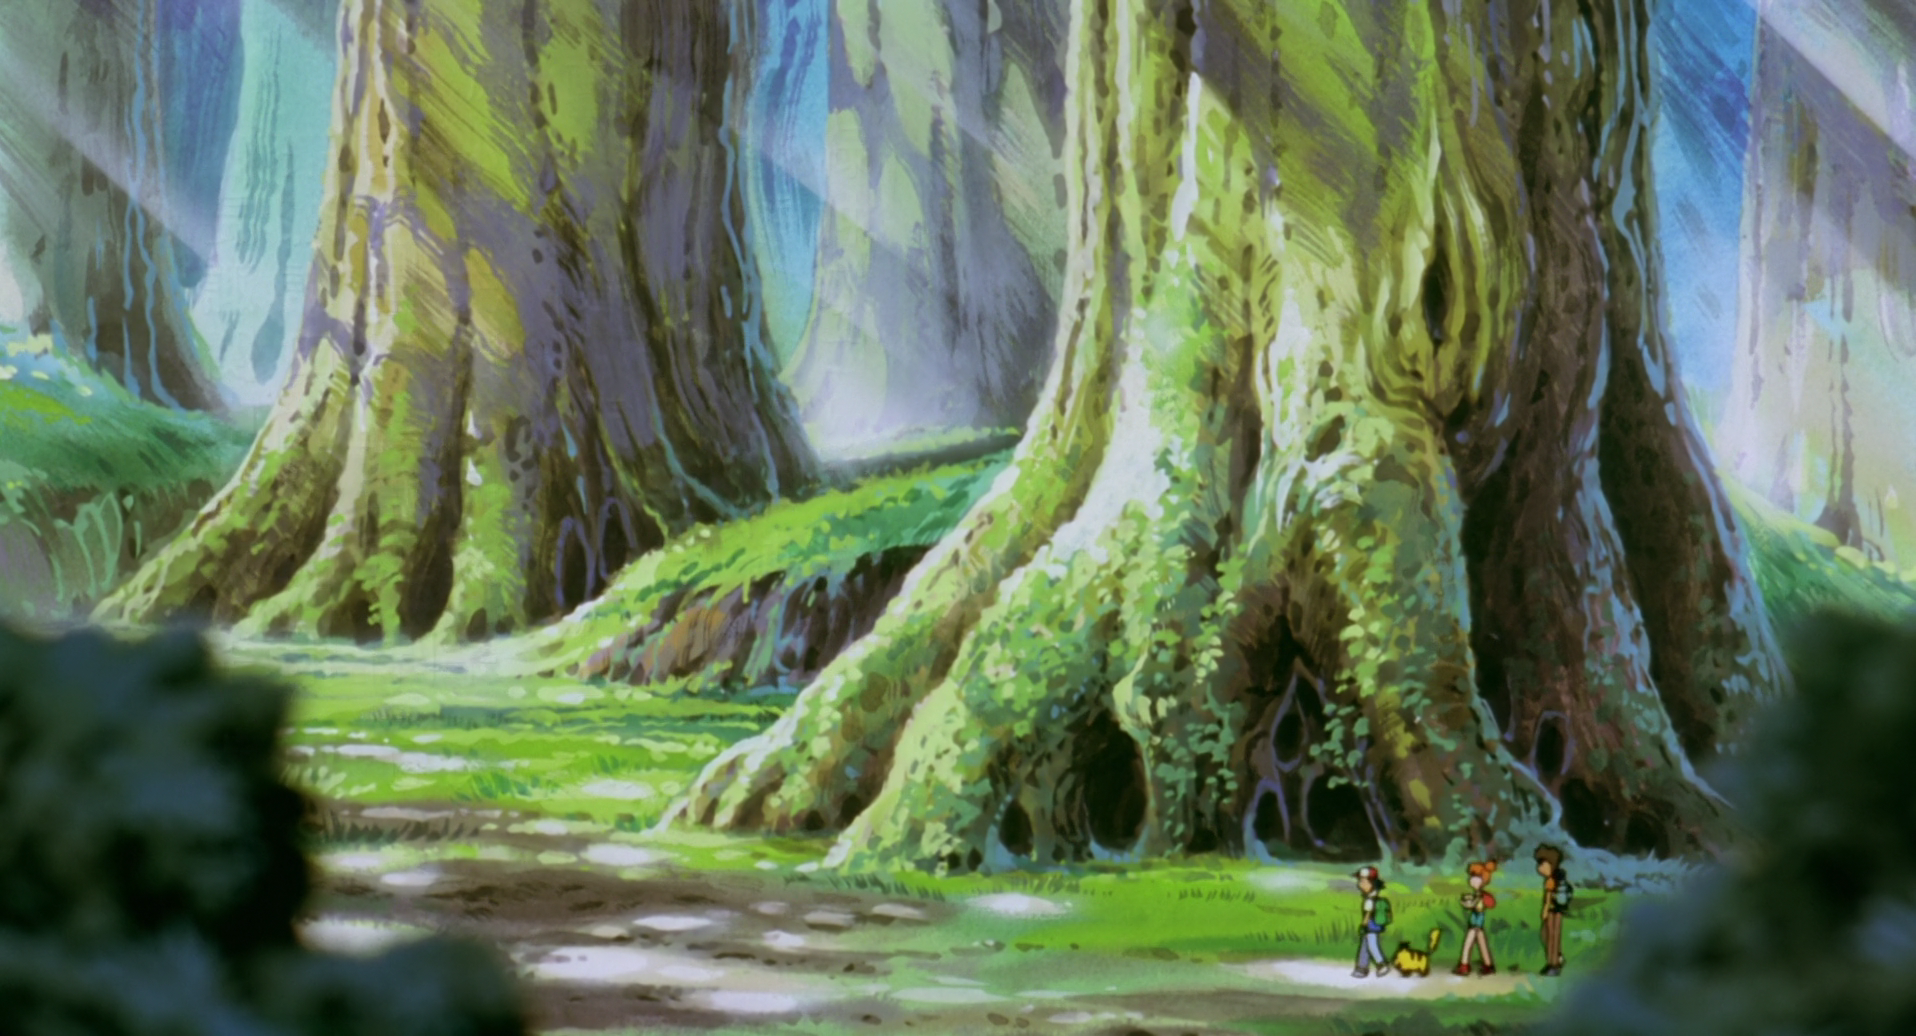 Anime Pokémon: The First Movie HD Wallpaper | Background Image